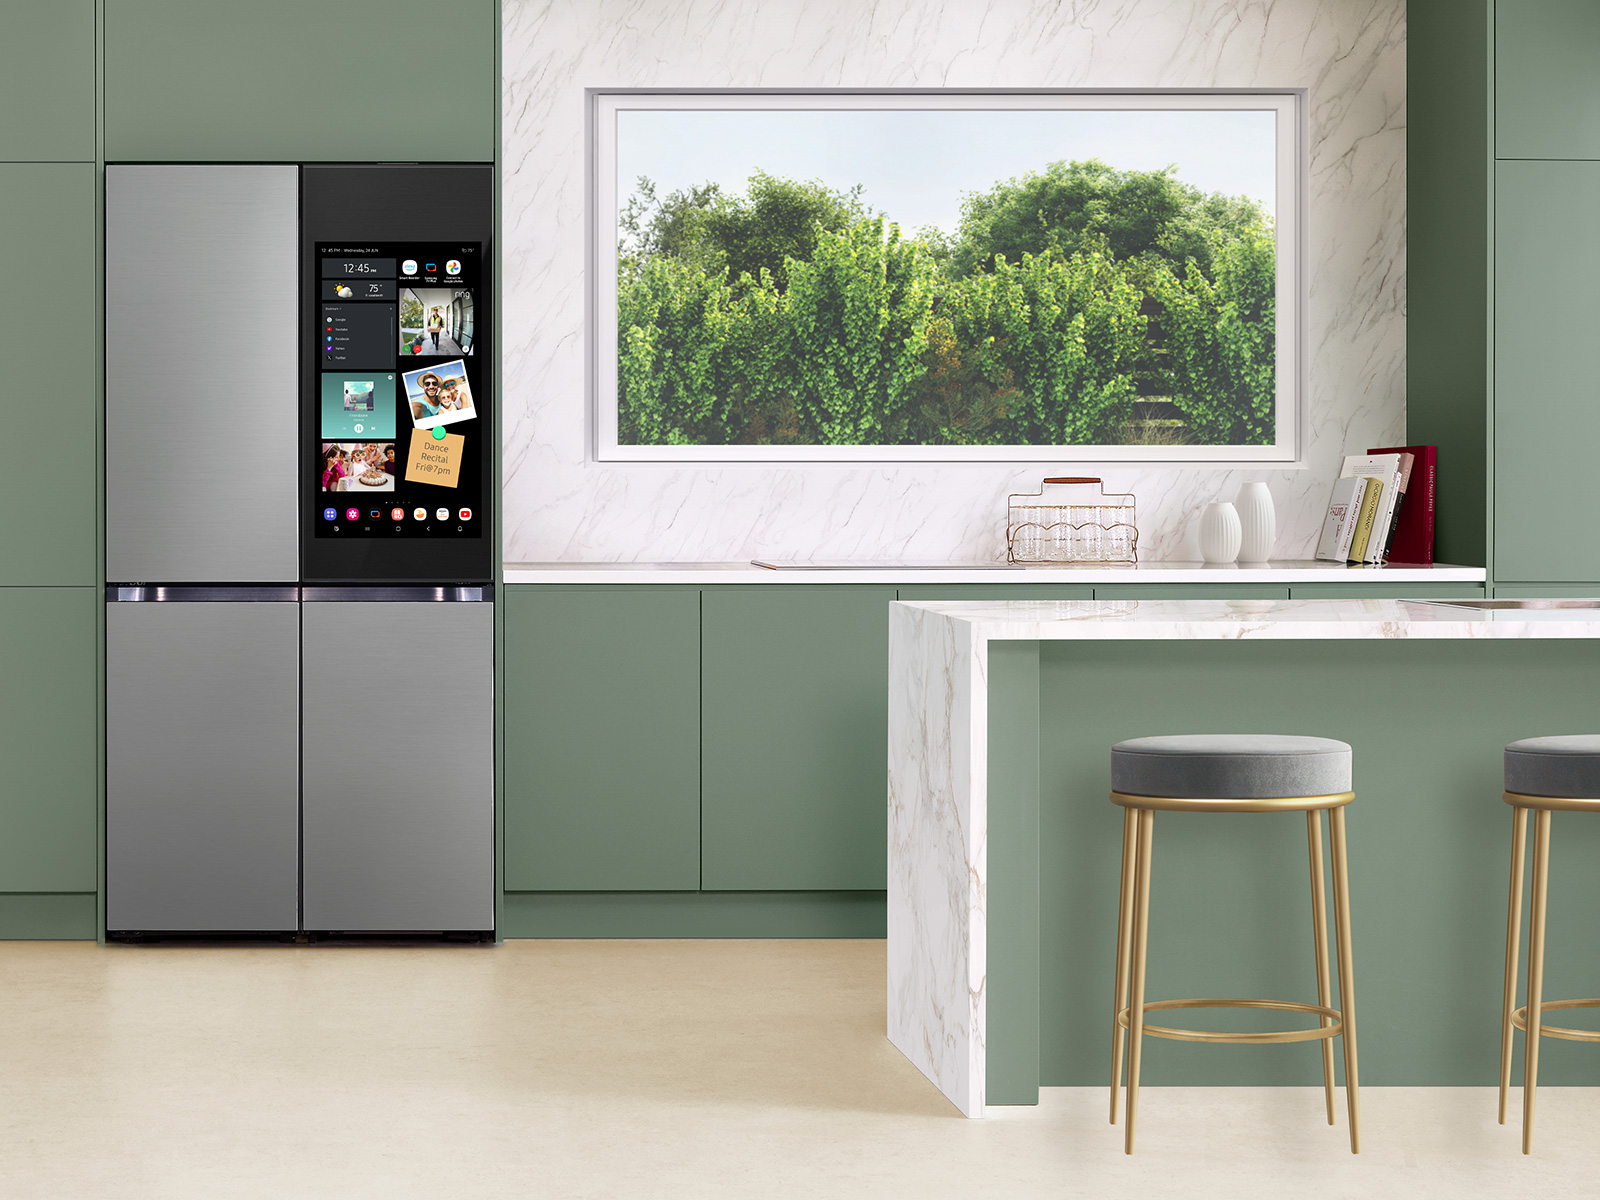 Thumbnail image of Bespoke 4-Door Flex™ Refrigerator (29 cu. ft.) with AI Family Hub+™ and AI Vision Inside™ in Stainless Steel